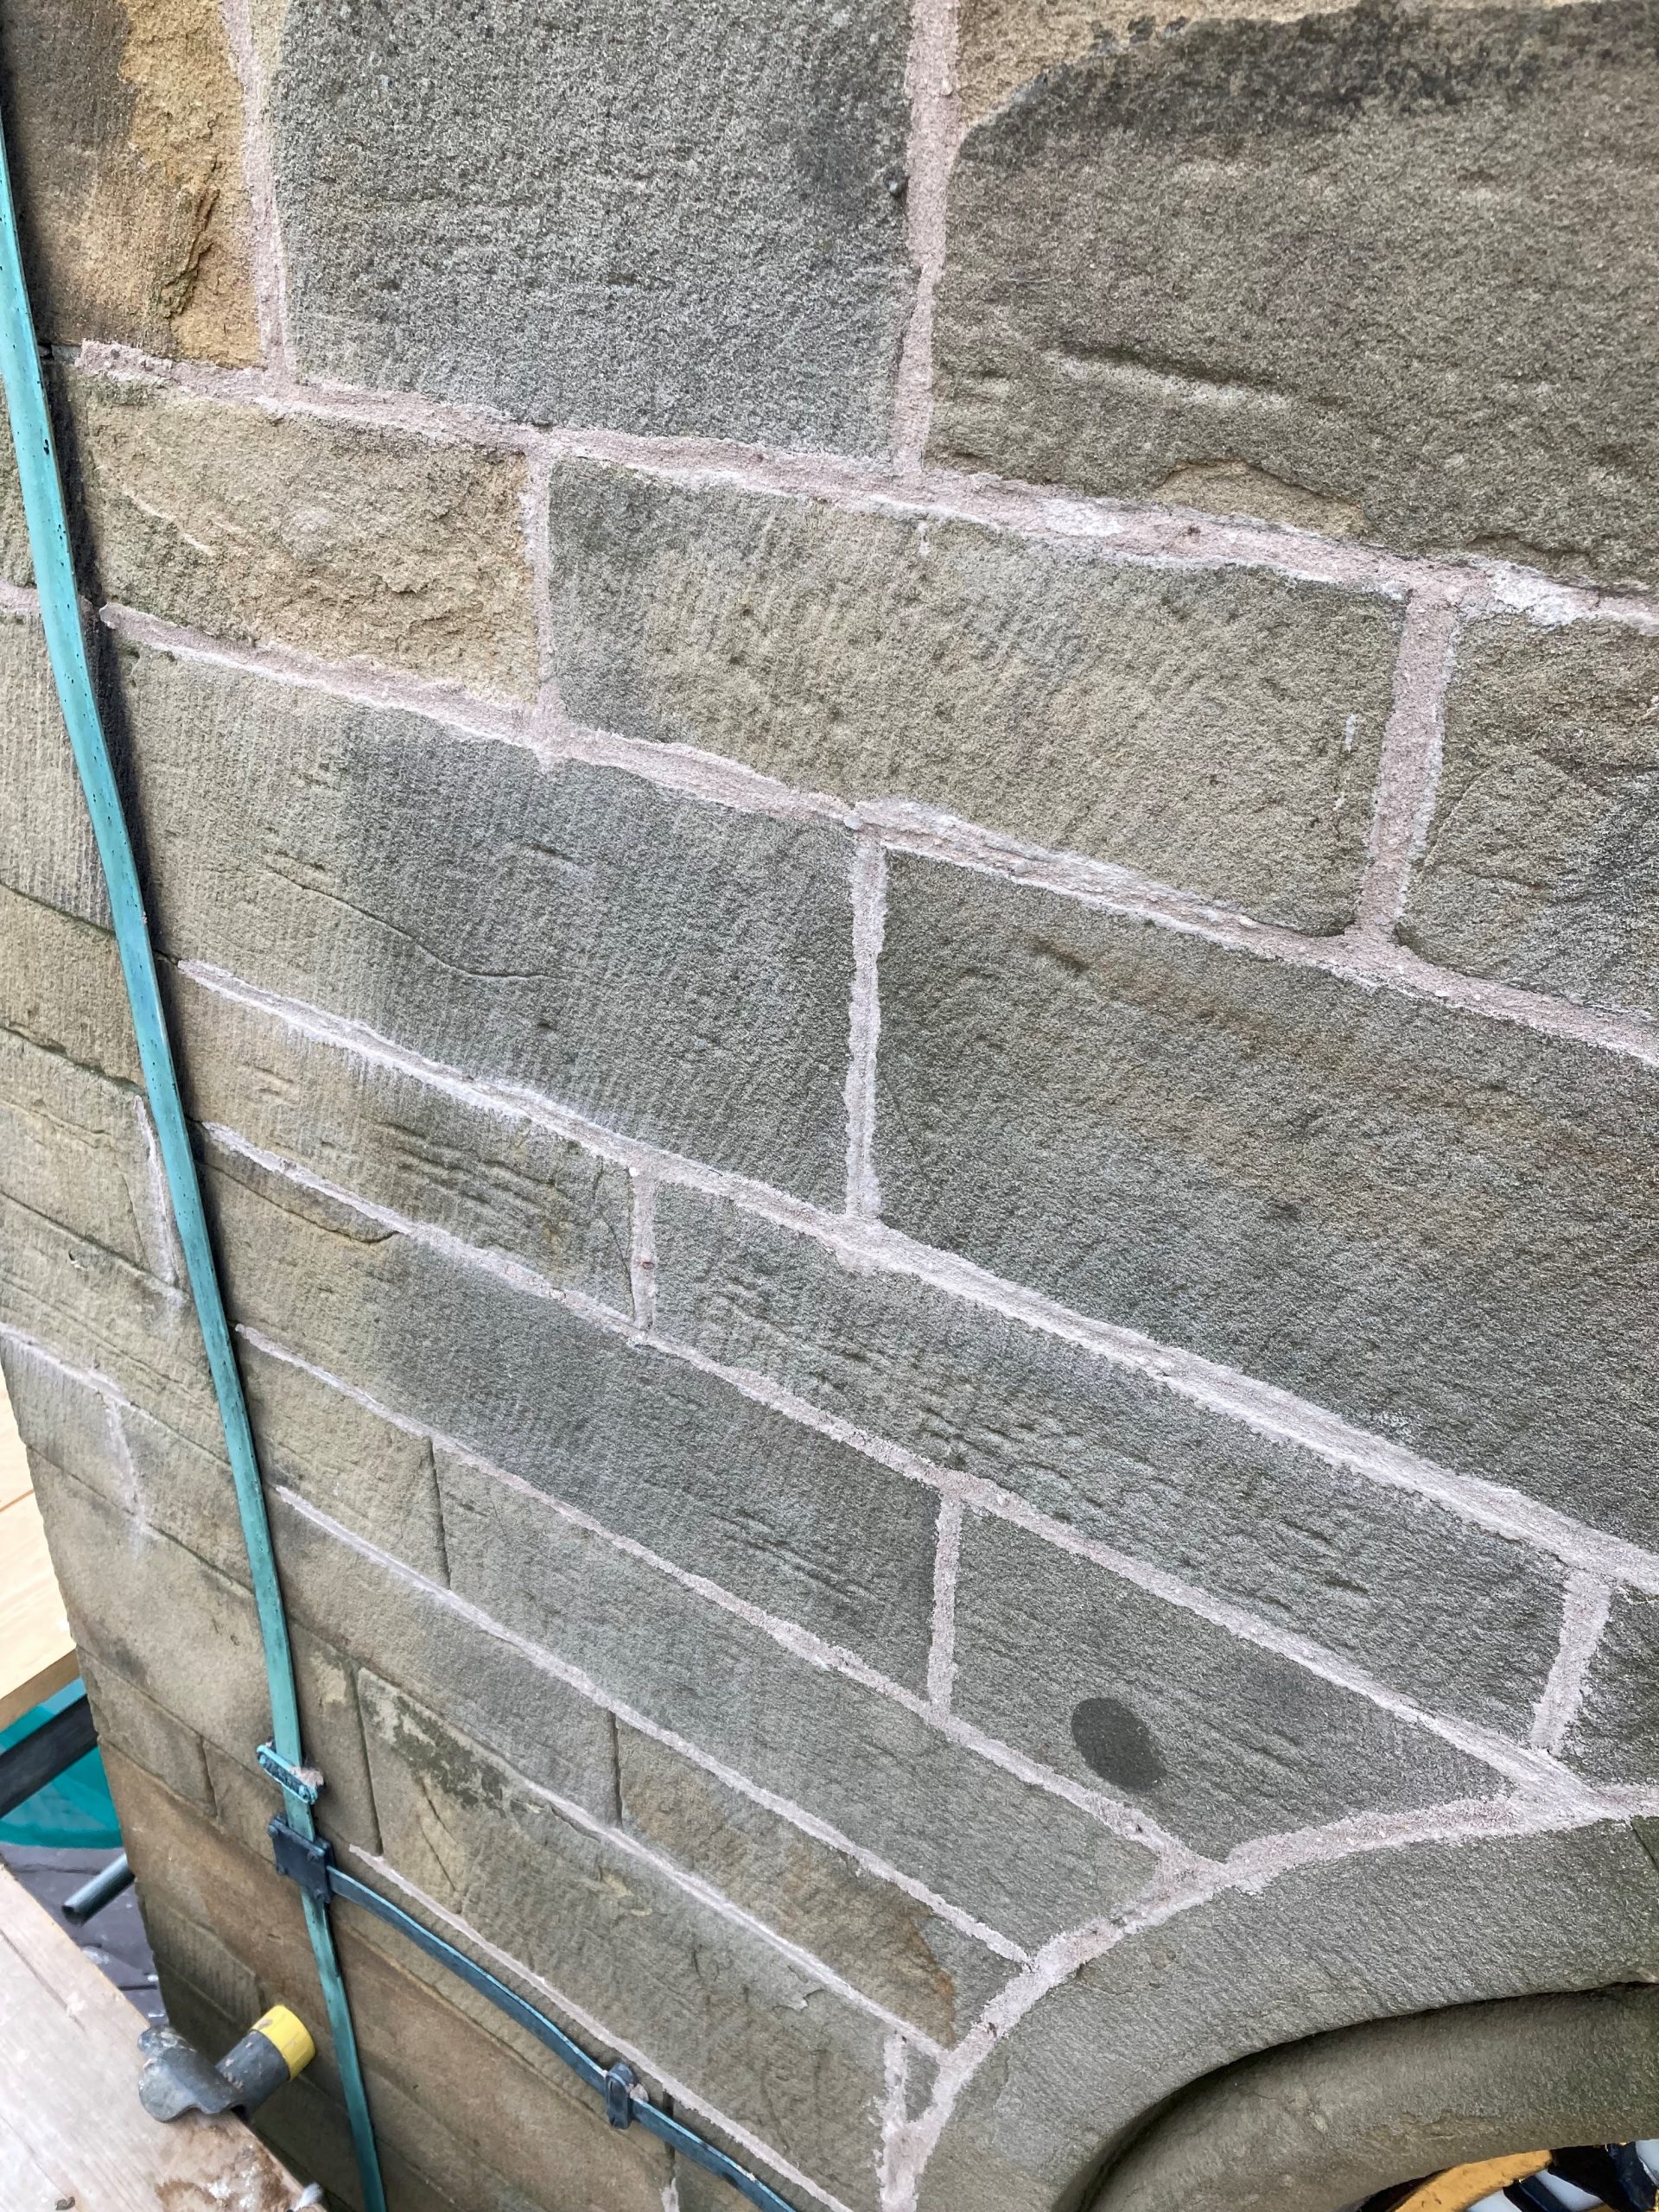 Re-pointing work